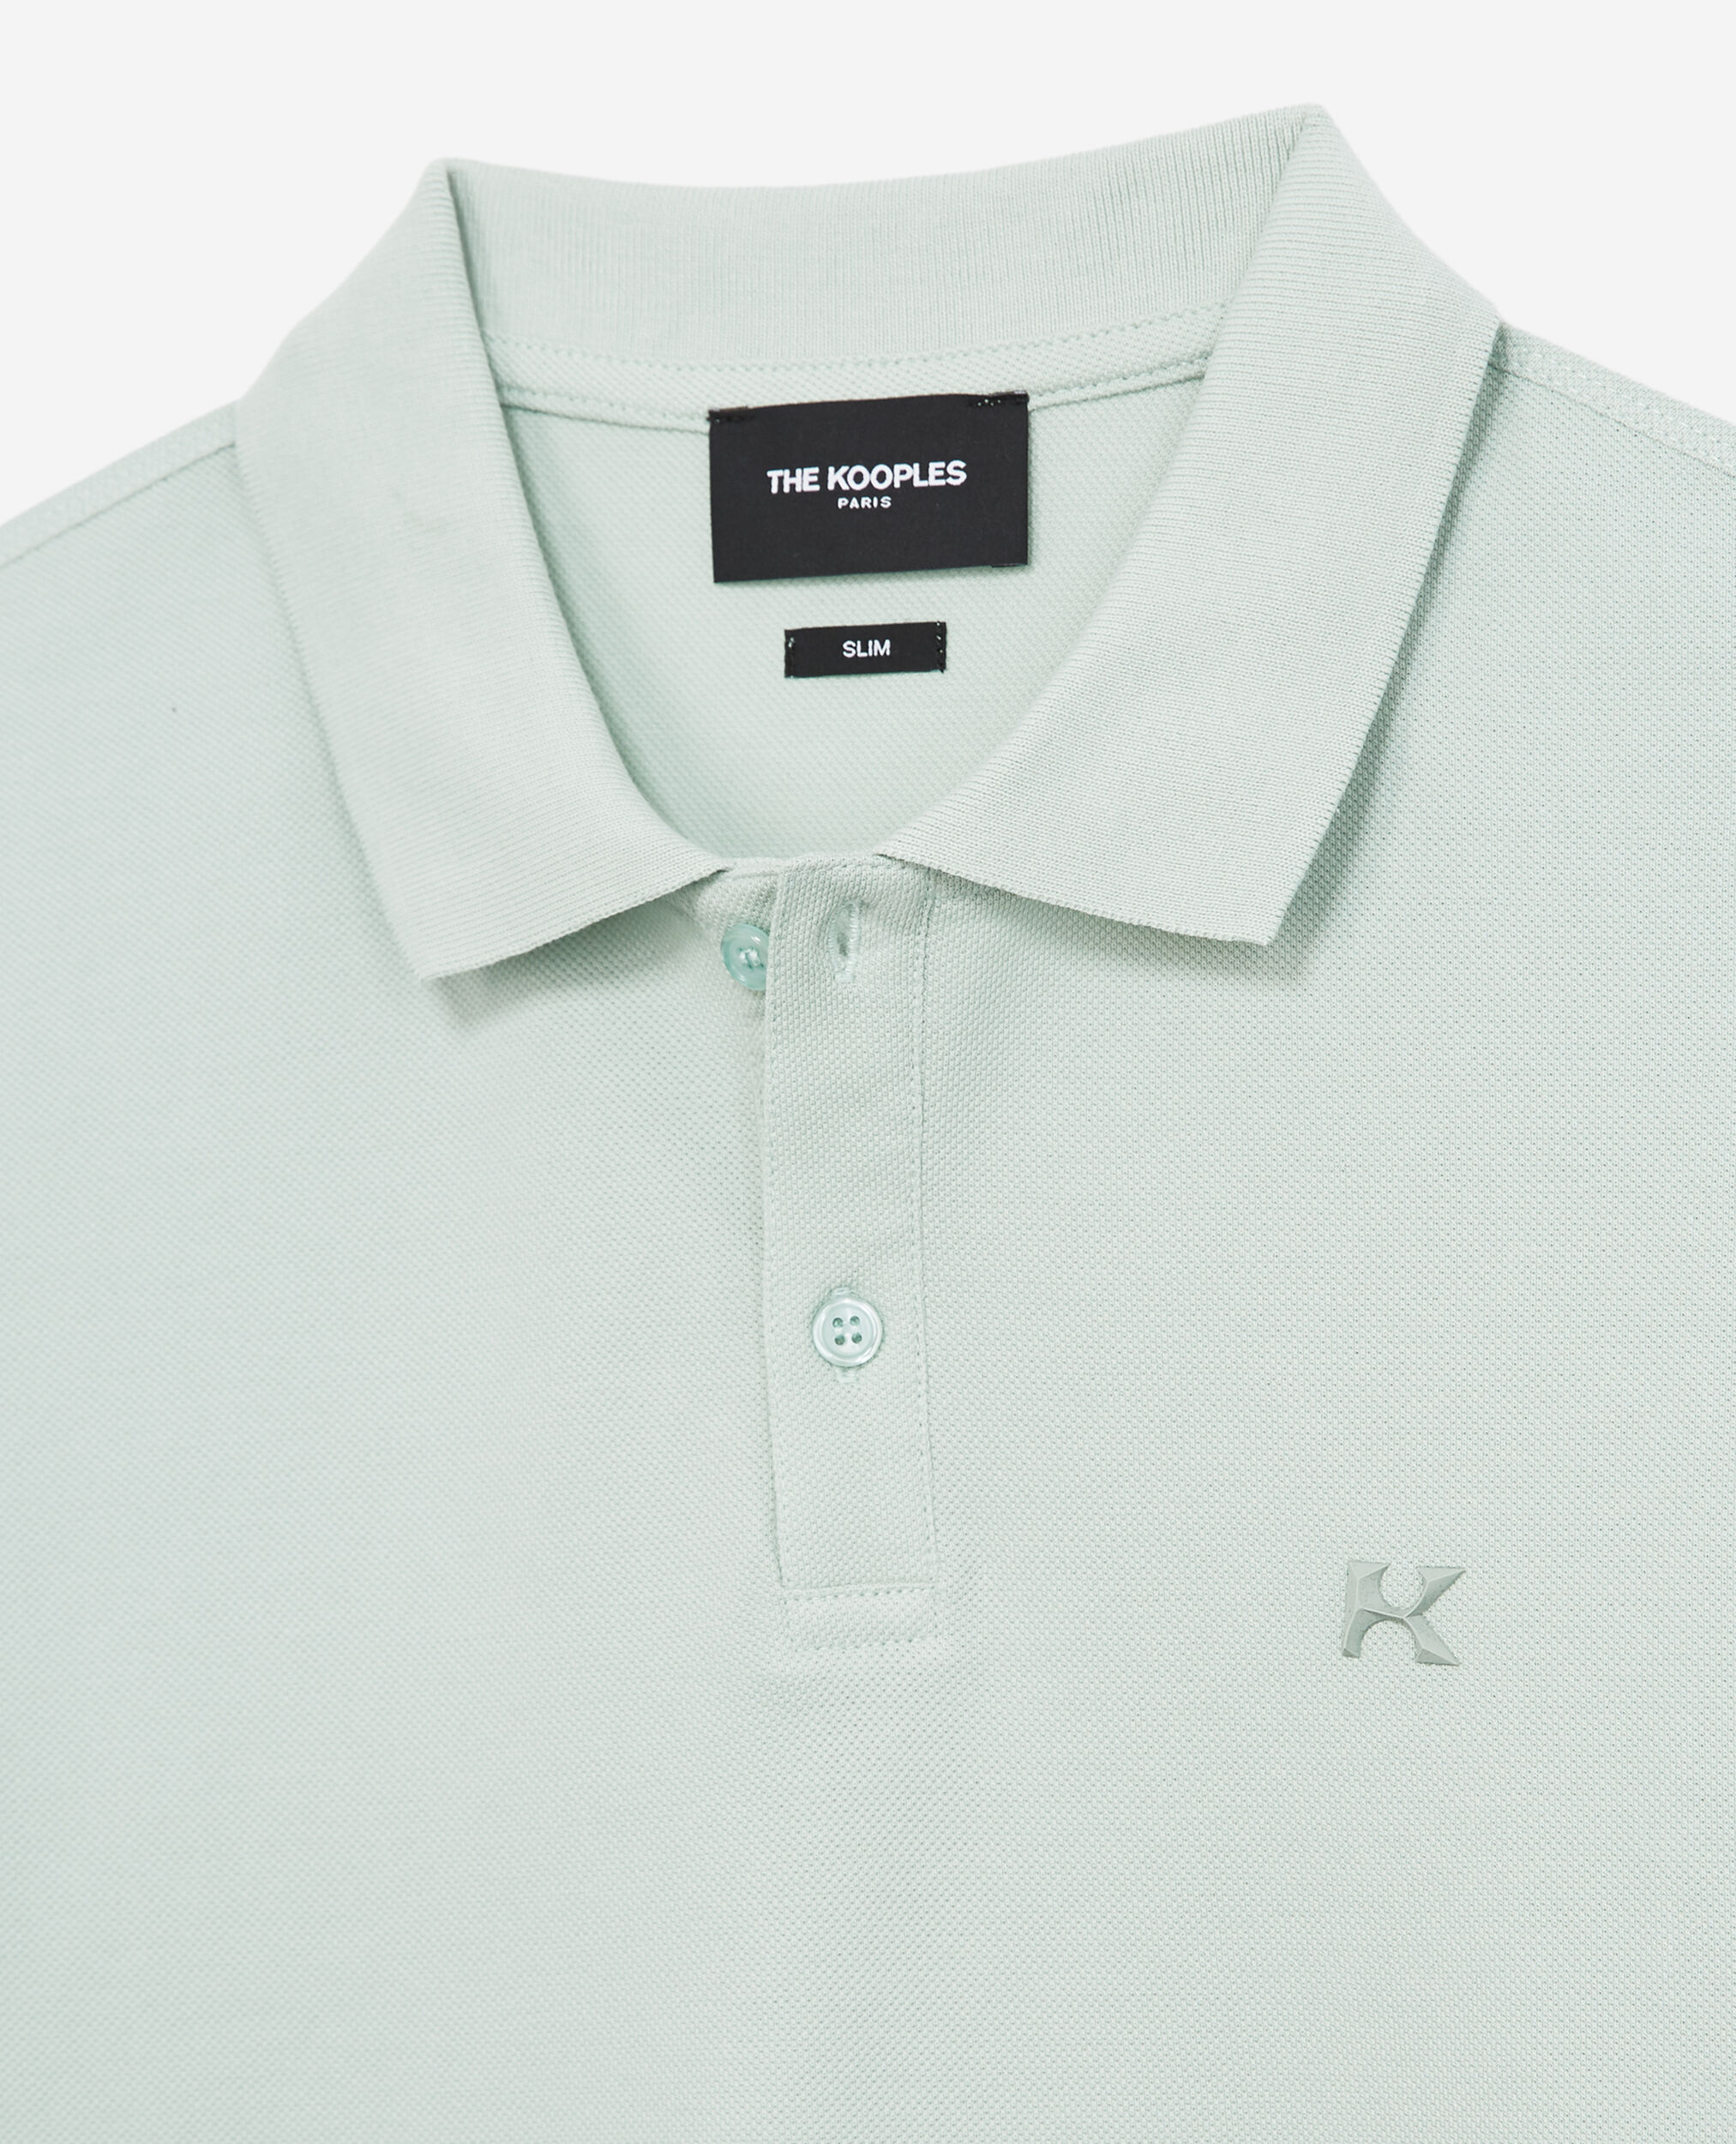 Camisa polo verde menta logotipo goma, FROSTY GREEN, hi-res image number null